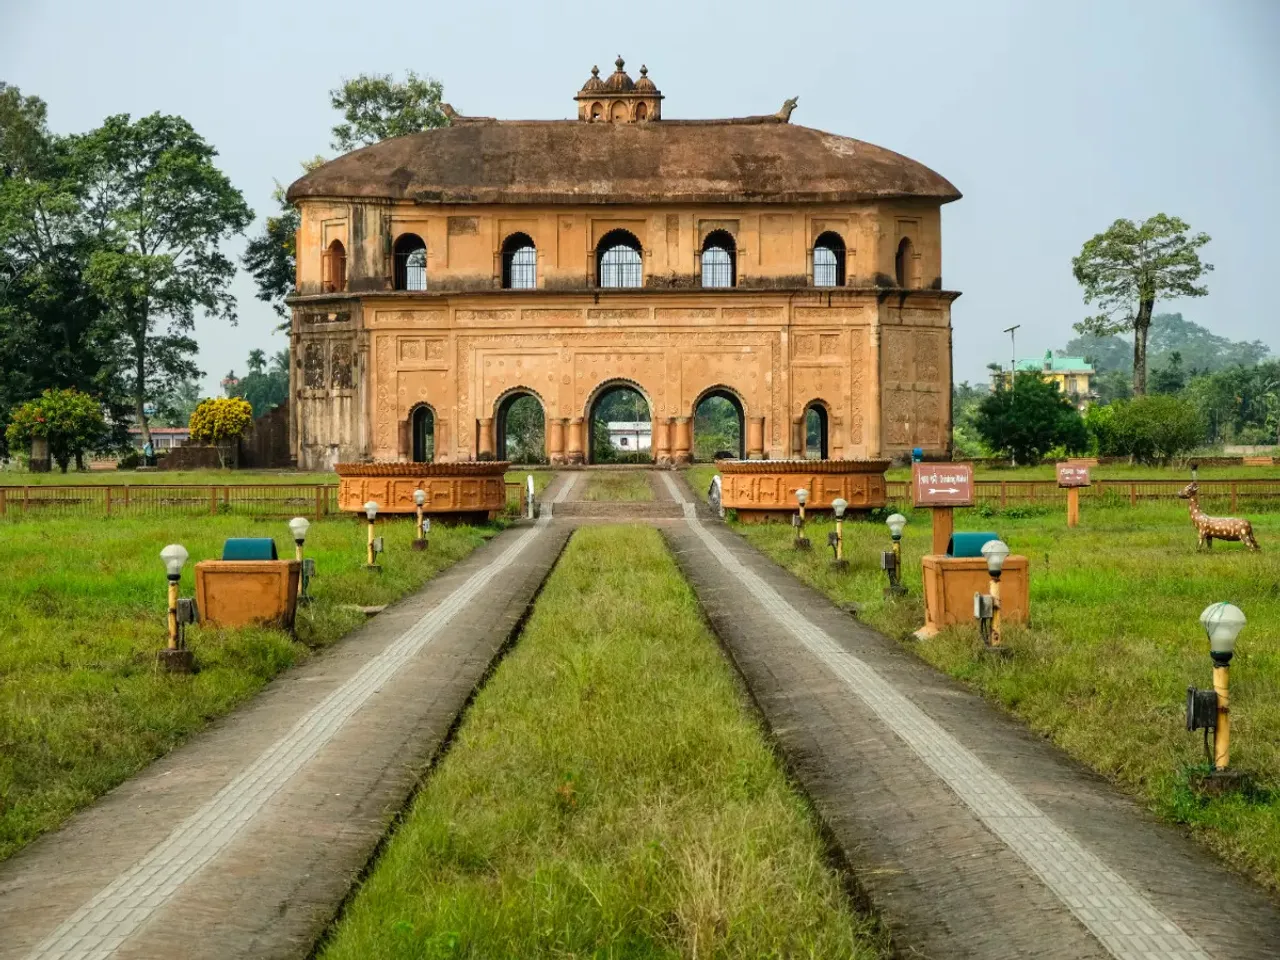 Don't forget to explore these heritage sites in Assam on your next trip to Northeast India